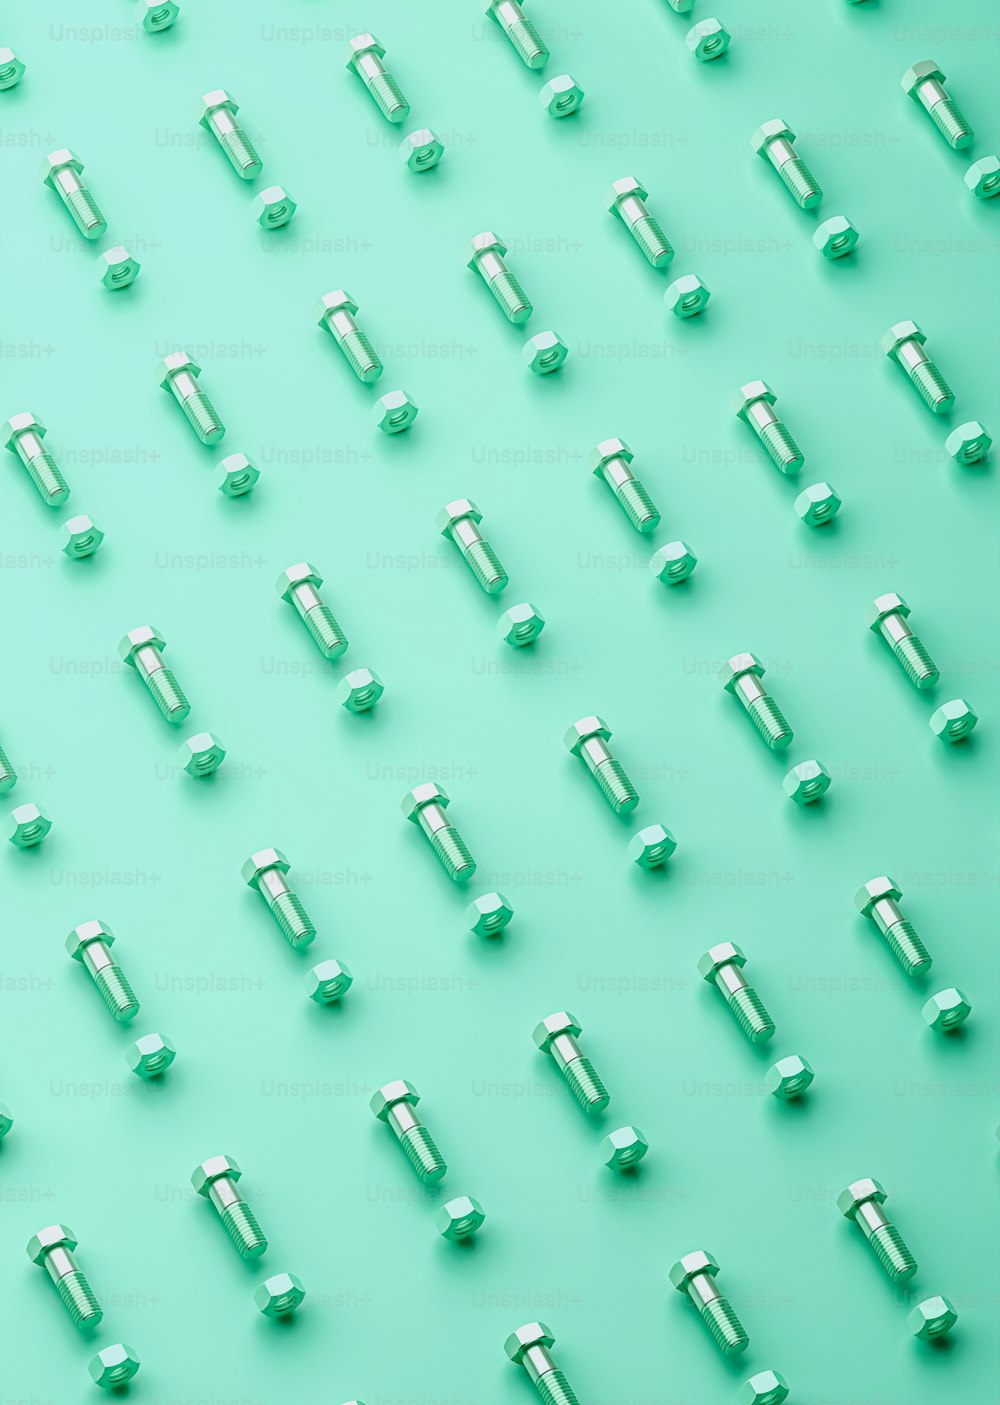 a group of screws on a blue background